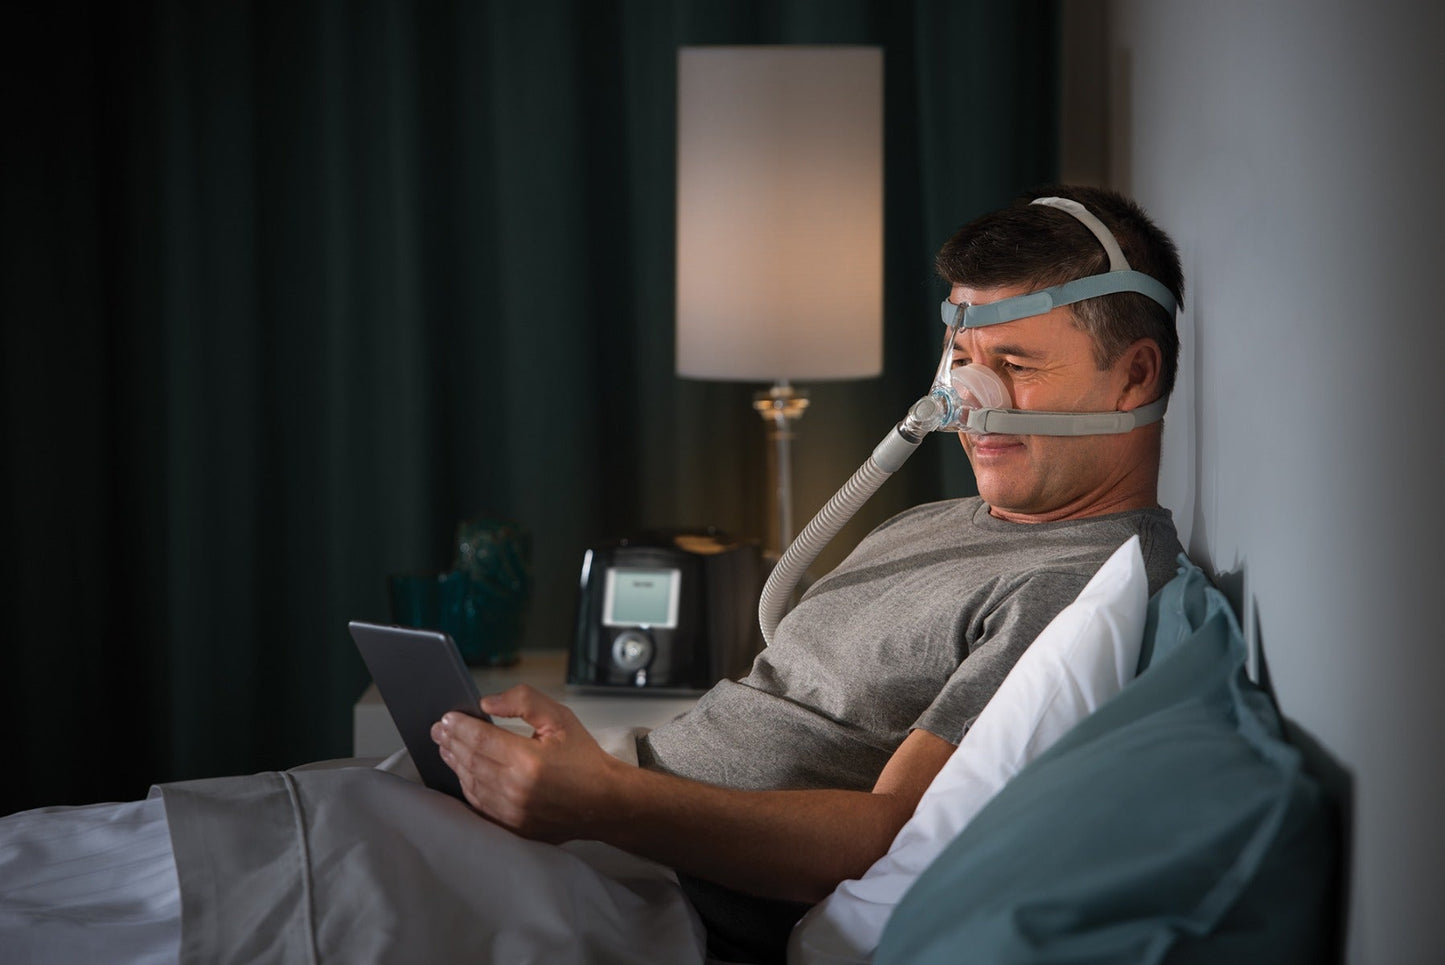 eson 2 cpap mask on man's face